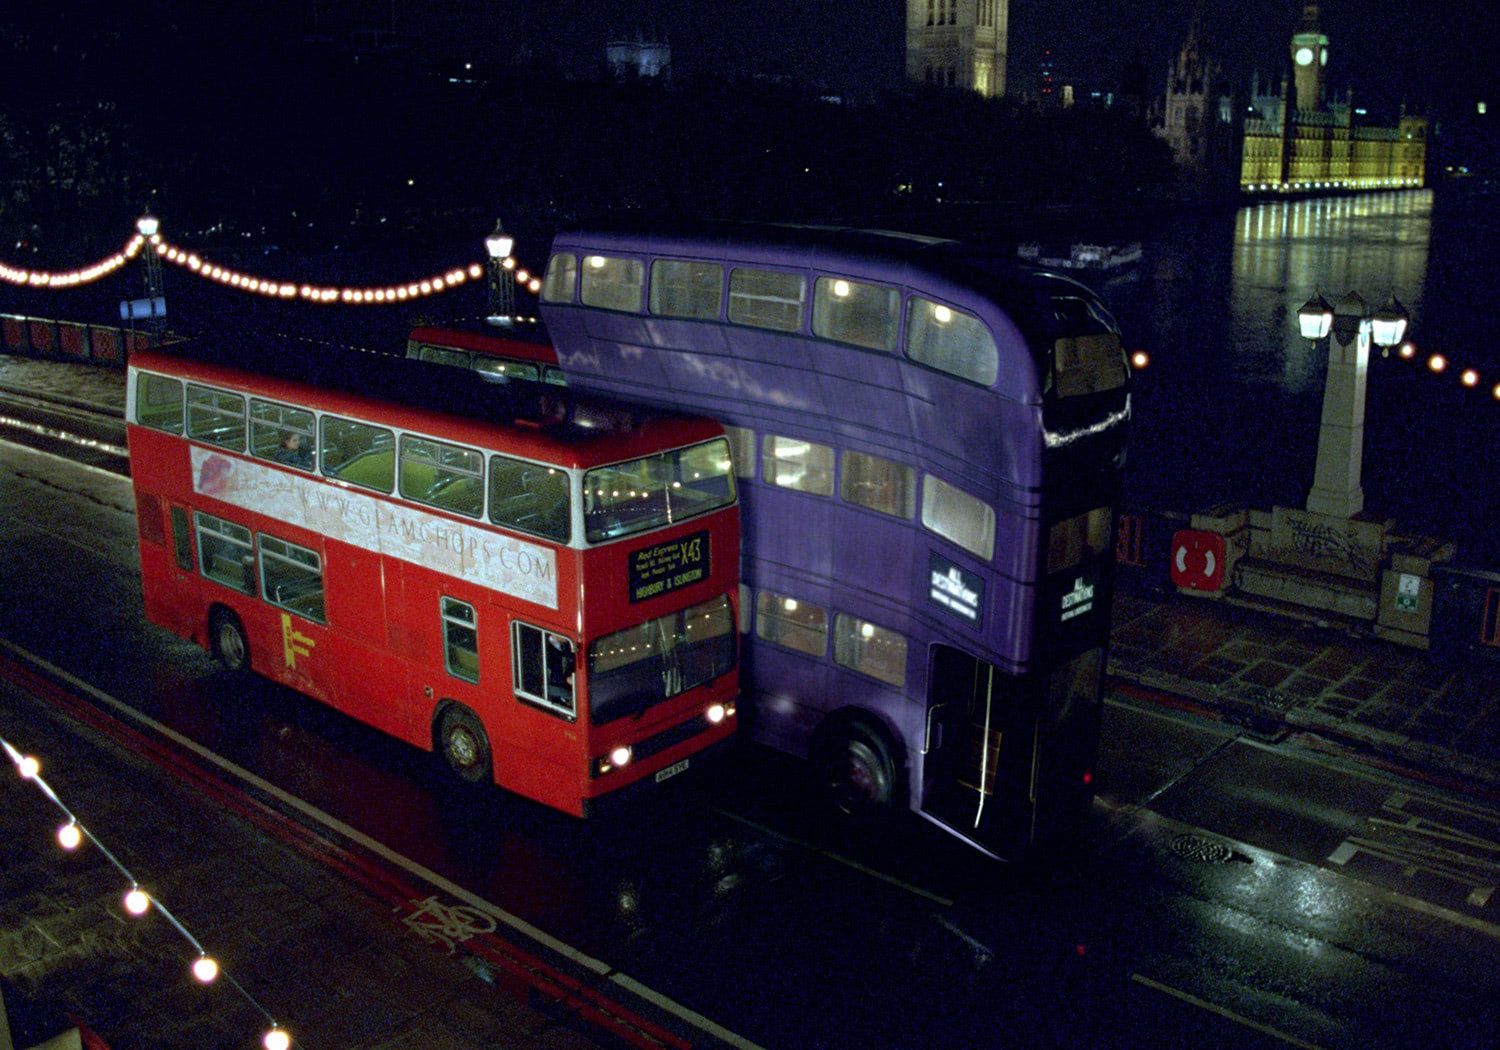 The Knight Bus in London